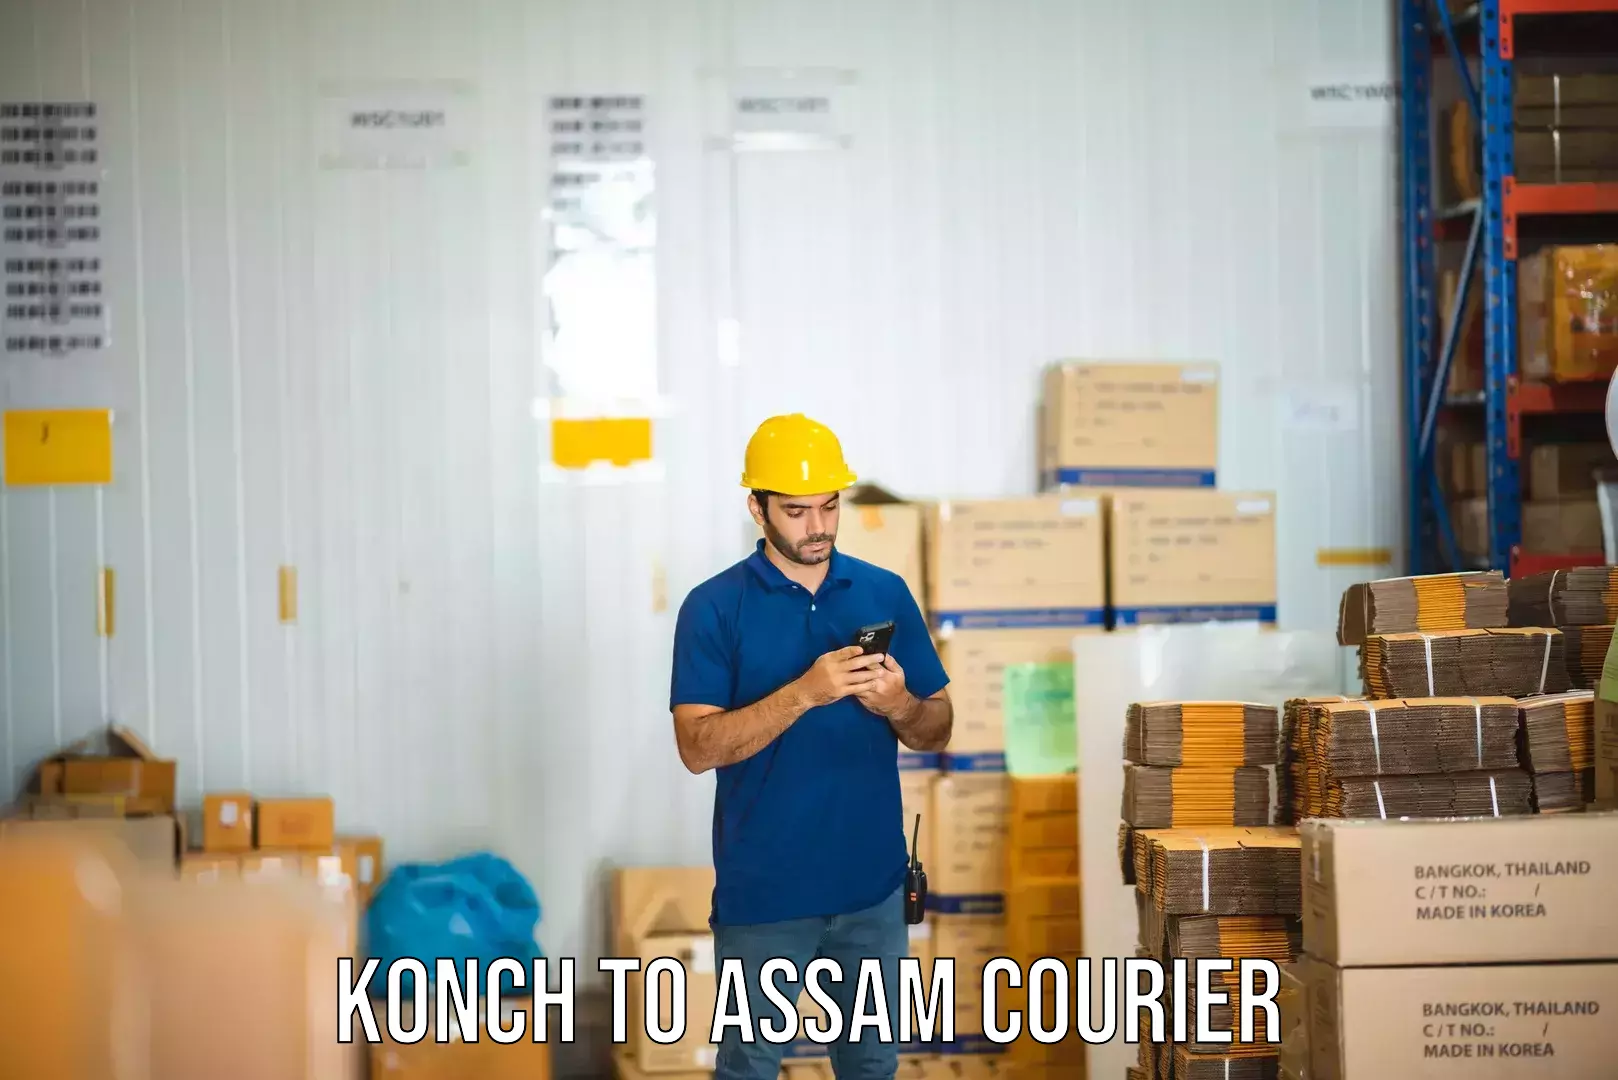 Express delivery capabilities Konch to Assam